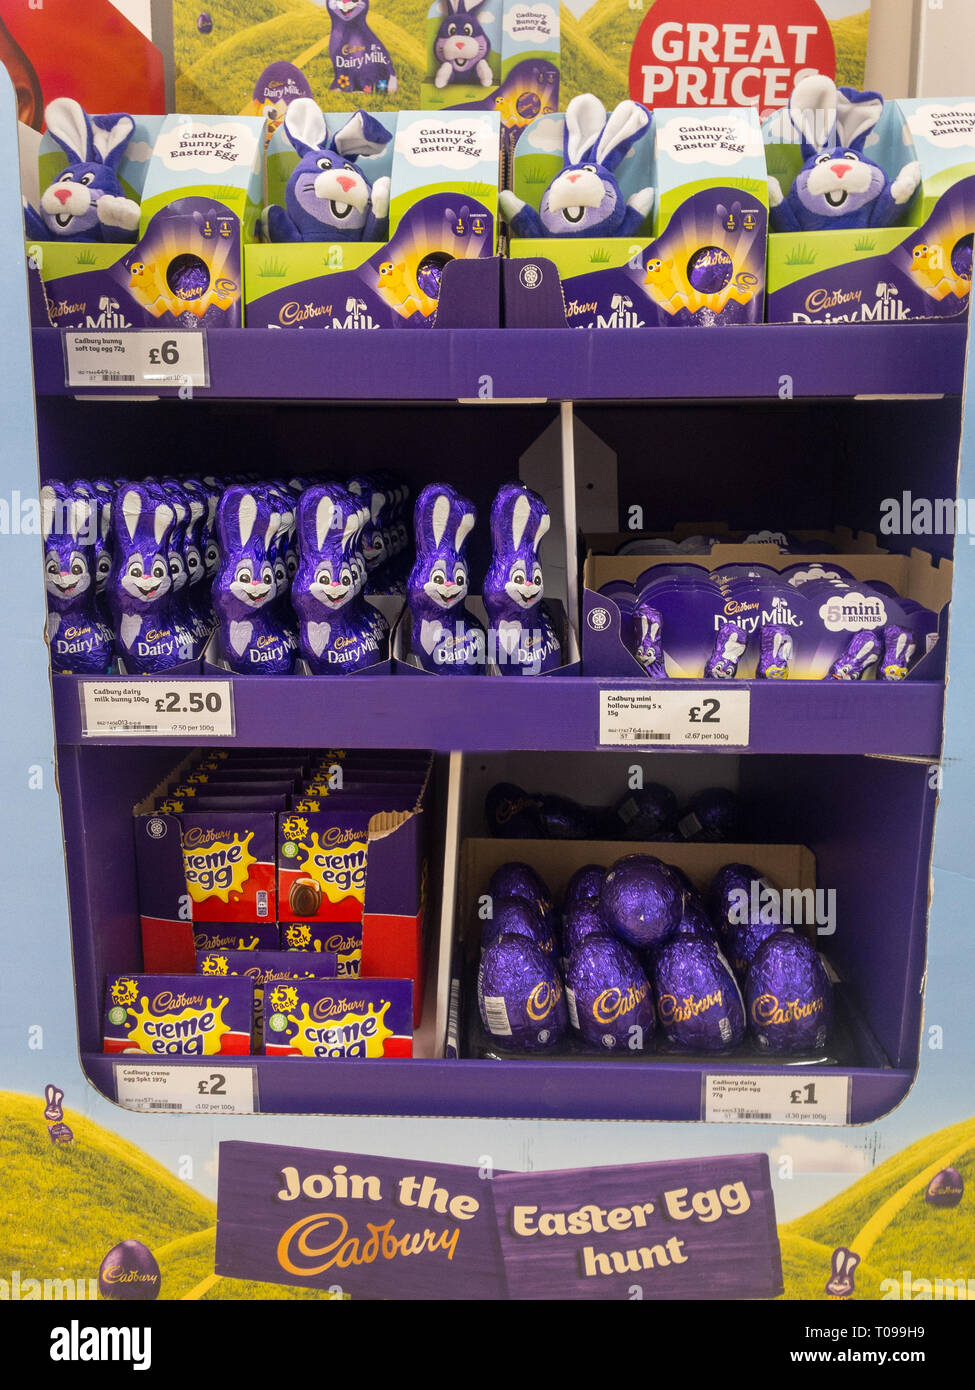 Exeter, Devon , England, March, 14, 2019: A supermarket in the UK end cap, selling chocolate Easter Eggs, chocolate Easter Bunnies. Lots of purple in  Stock Photo